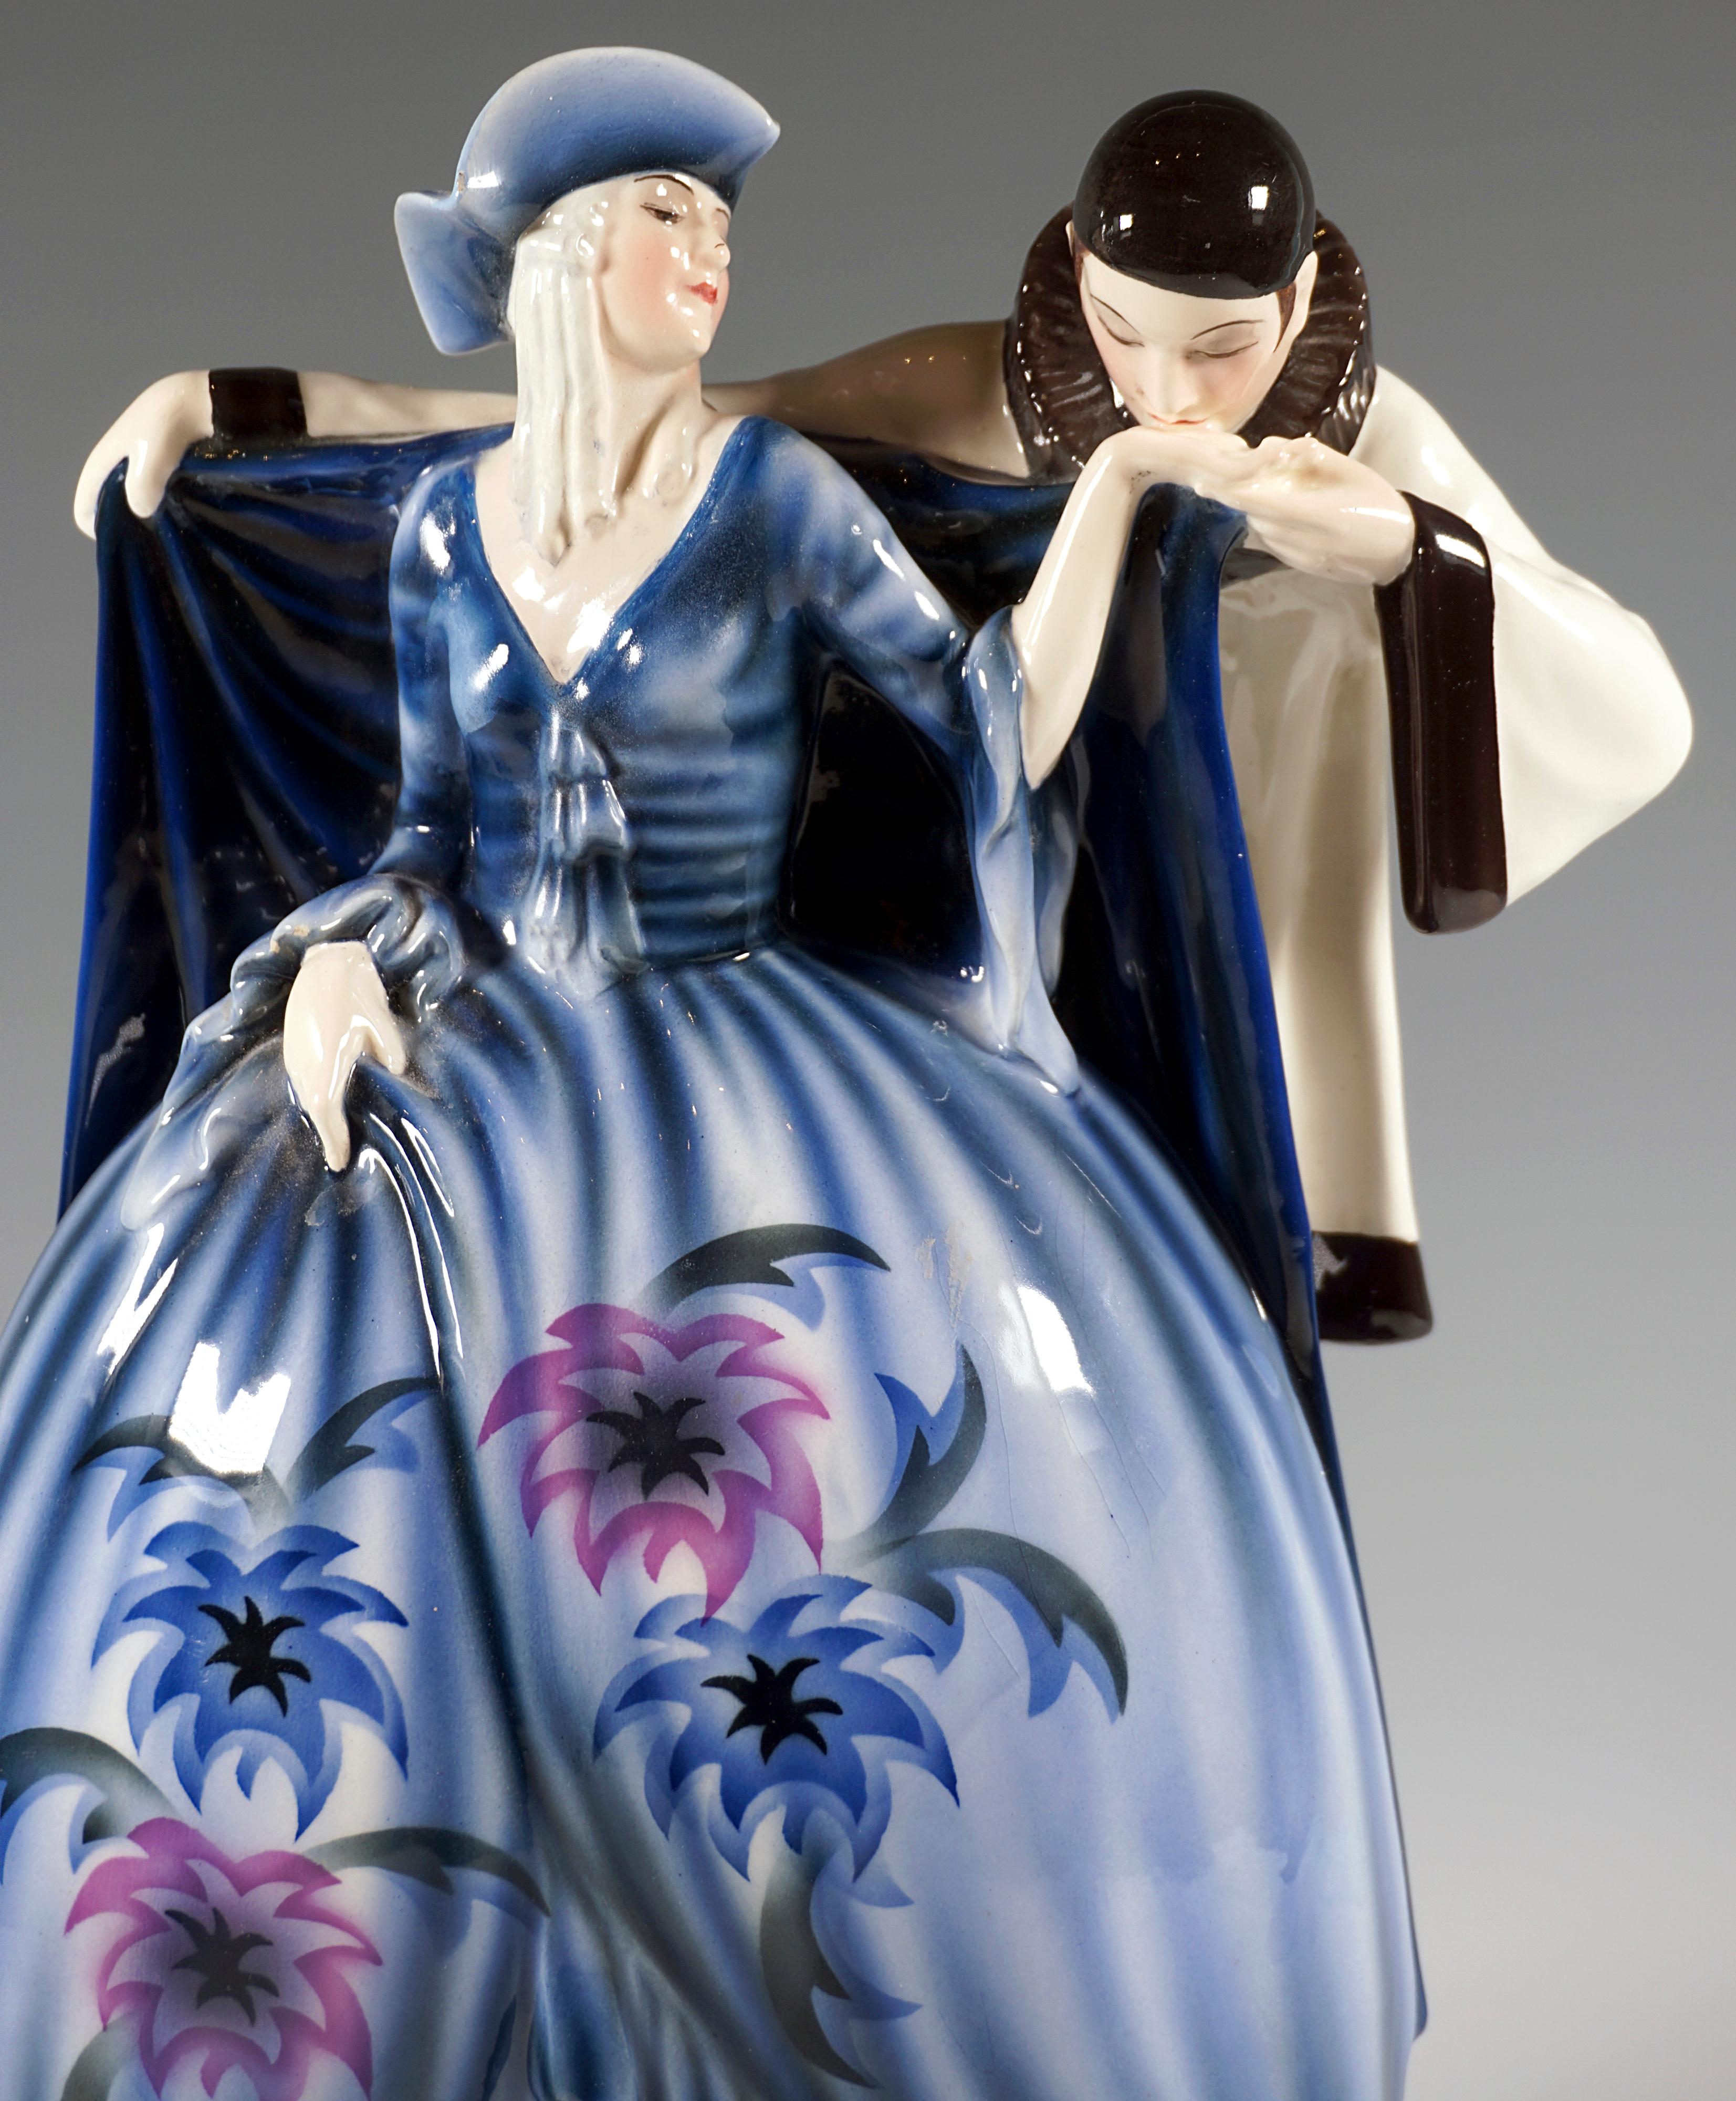 Hand-Crafted Goldscheider Art Déco Carnival Group 'Harlequin & Columbine', by Lorenzl c. 1929 For Sale